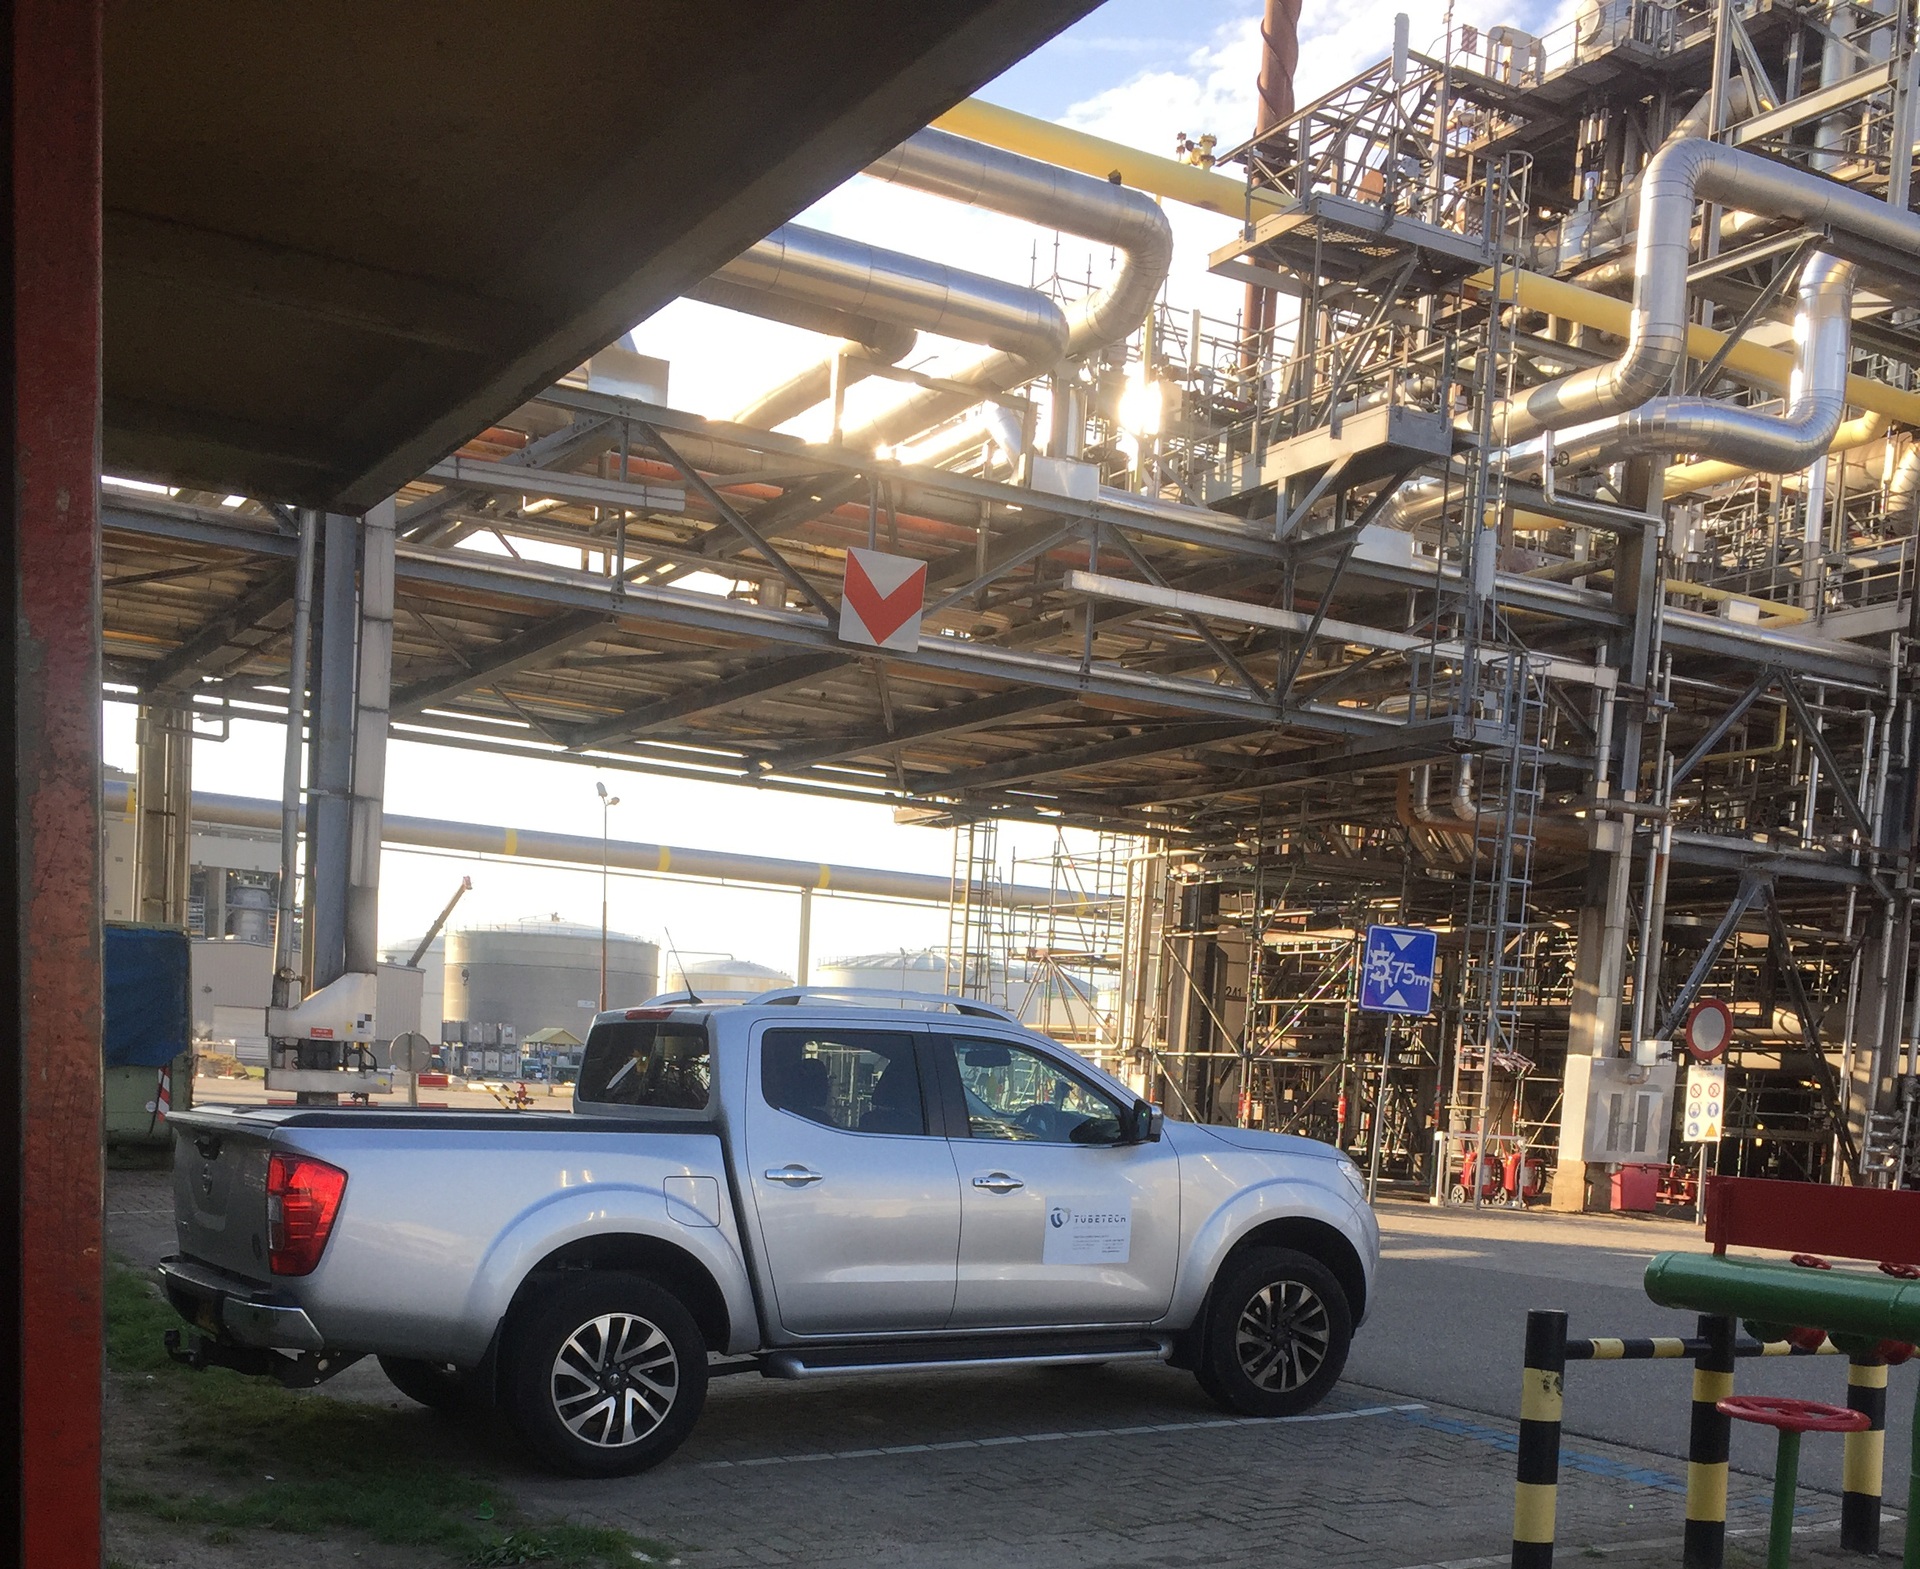 work truck in an industrial setting